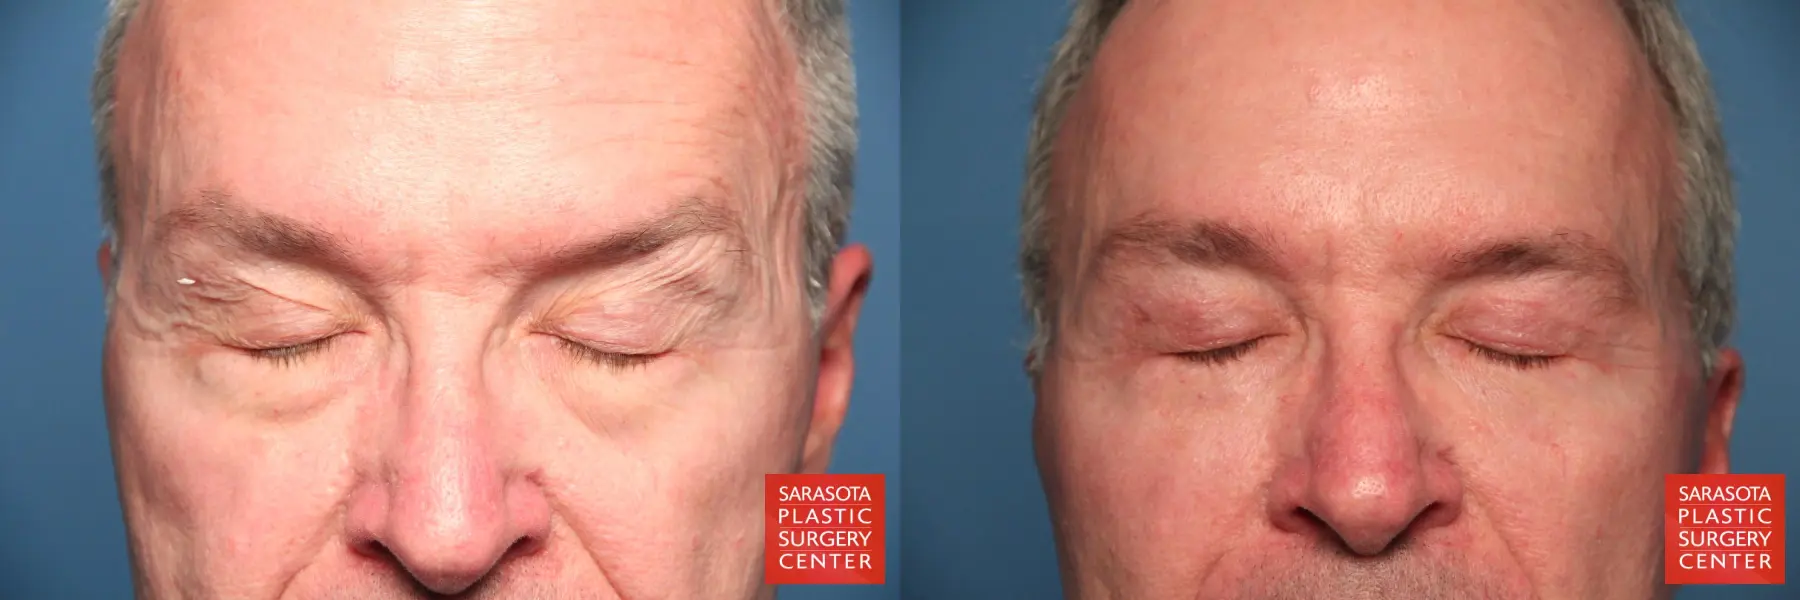 Eyelid Lift For Men: Patient 2 - Before and After 3